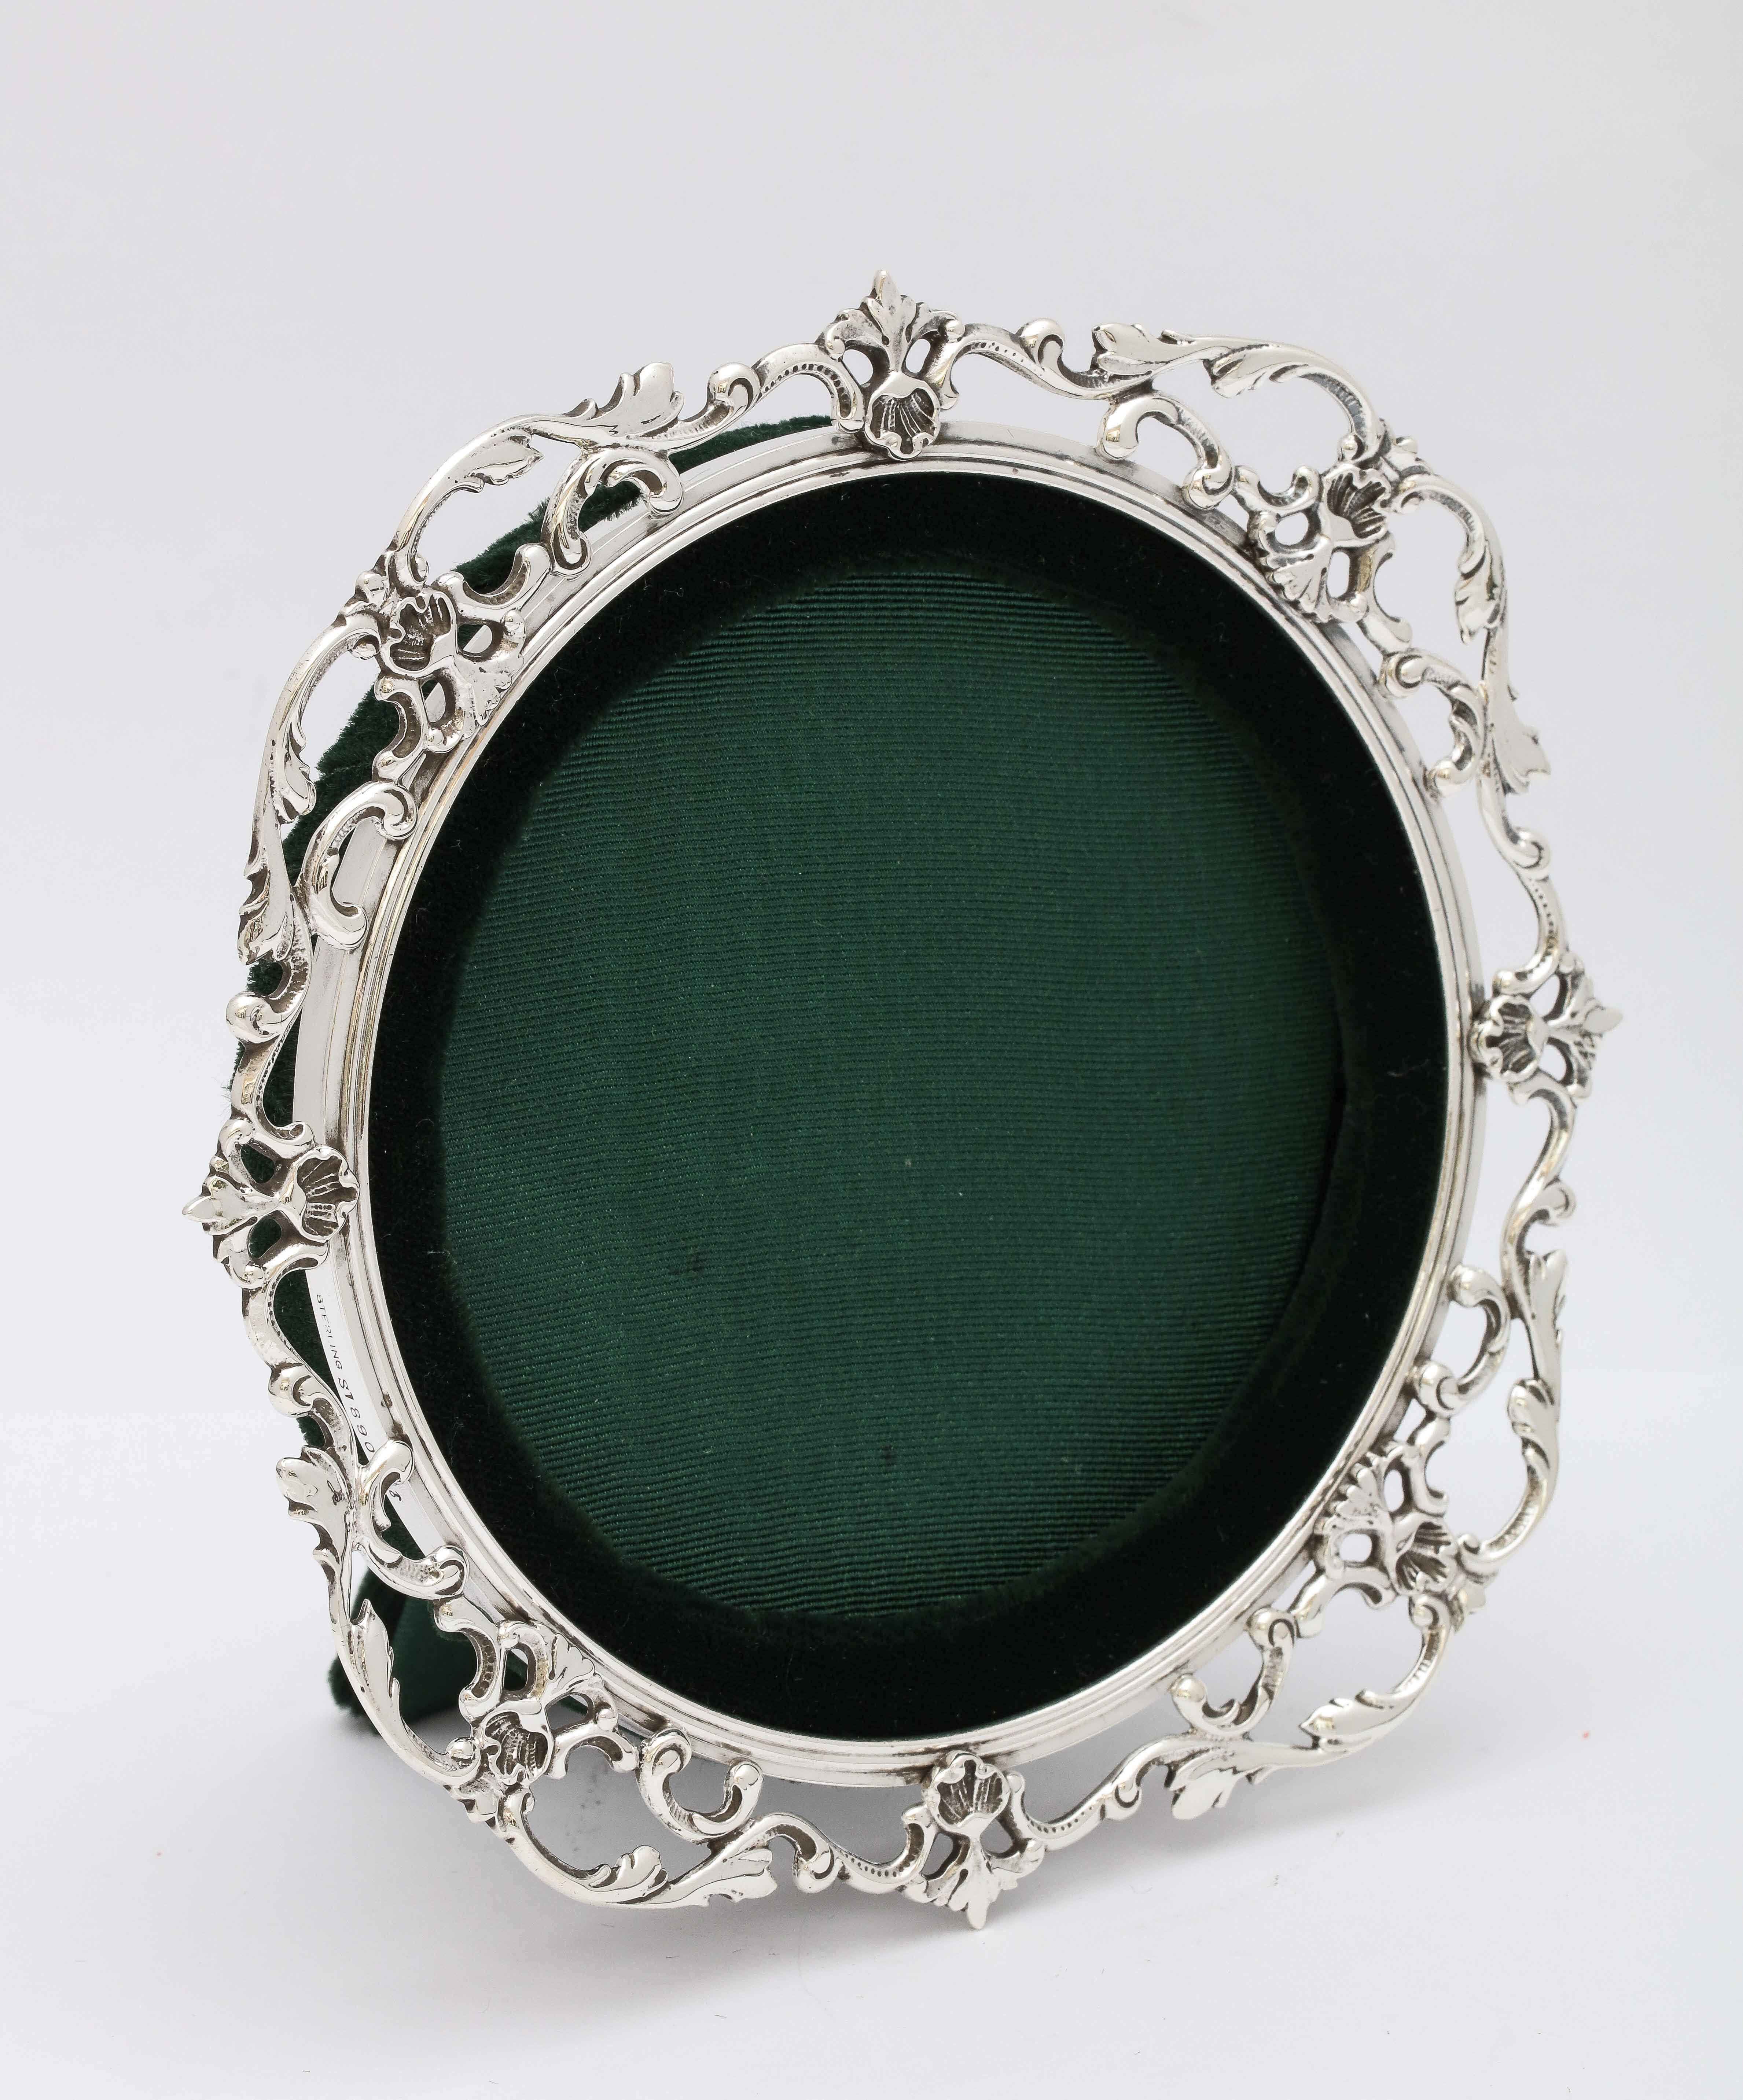 Victorian, sterling silver picture frame, Gorham Mfg. Co., Providence, Rhode Island, year-hallmarked for 1894. Measures 6 inches high x 6 inches wide; when easel is in open position, frame measures 3 1/2 inches deep. Frame will hold a photo 4 inches